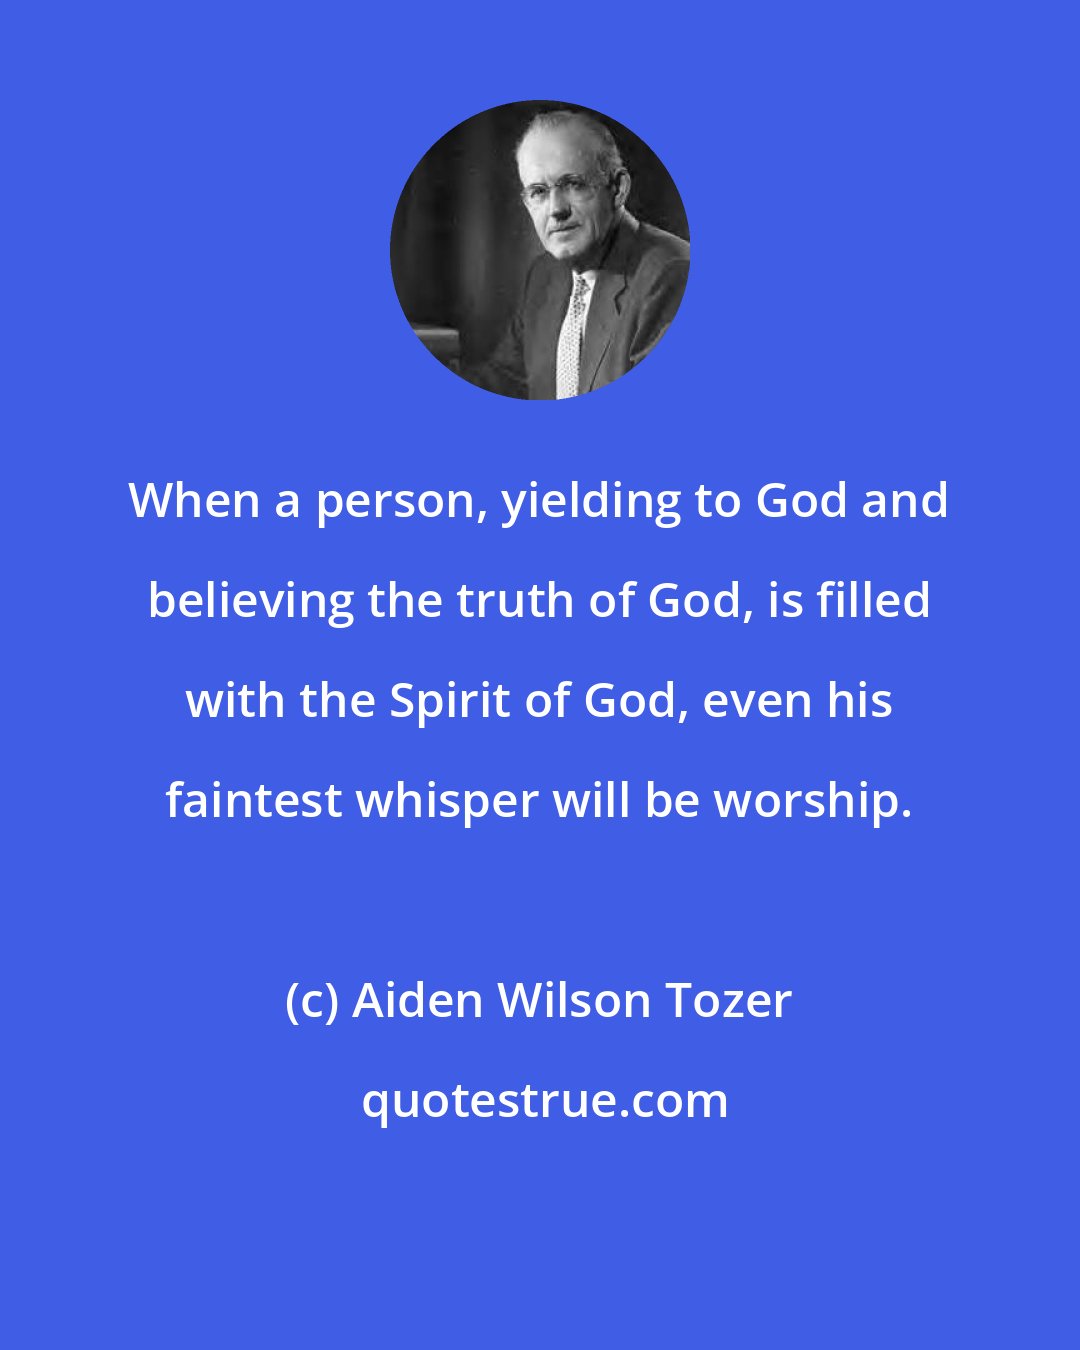 Aiden Wilson Tozer: When a person, yielding to God and believing the truth of God, is filled with the Spirit of God, even his faintest whisper will be worship.